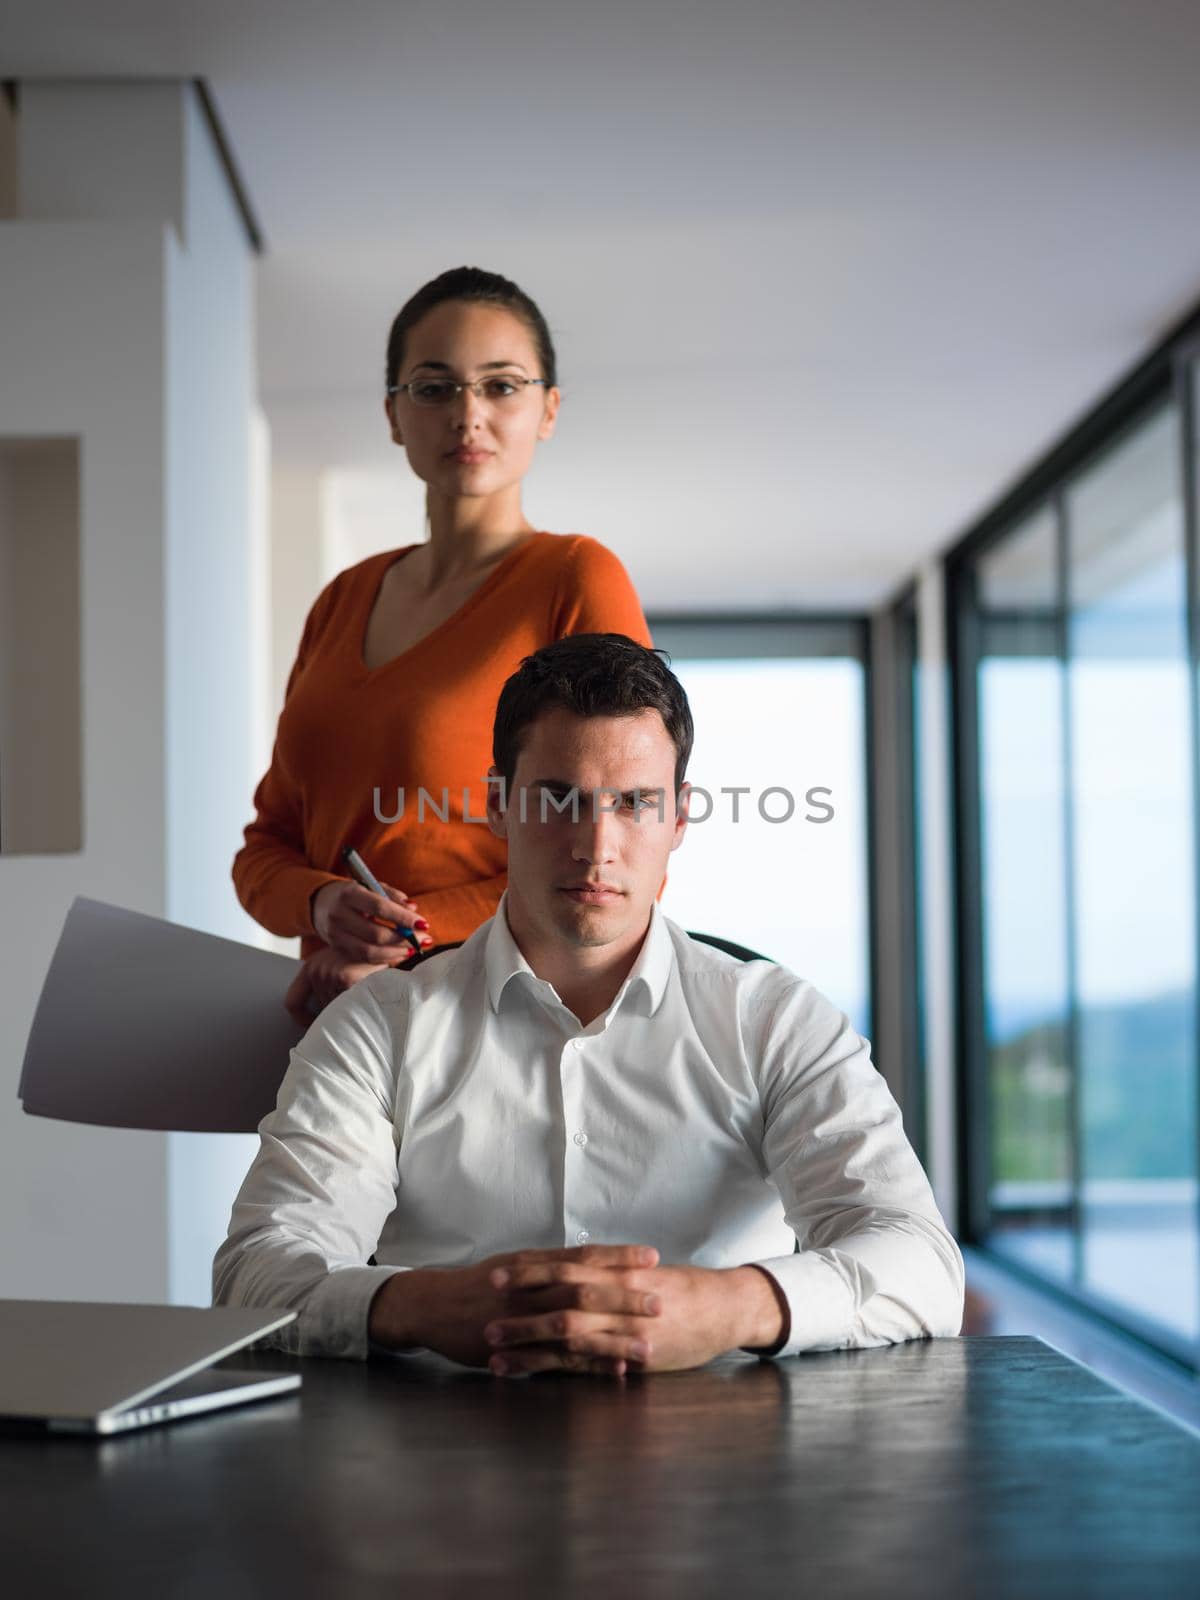 business people team on meeting at bright office space working on laptop computer